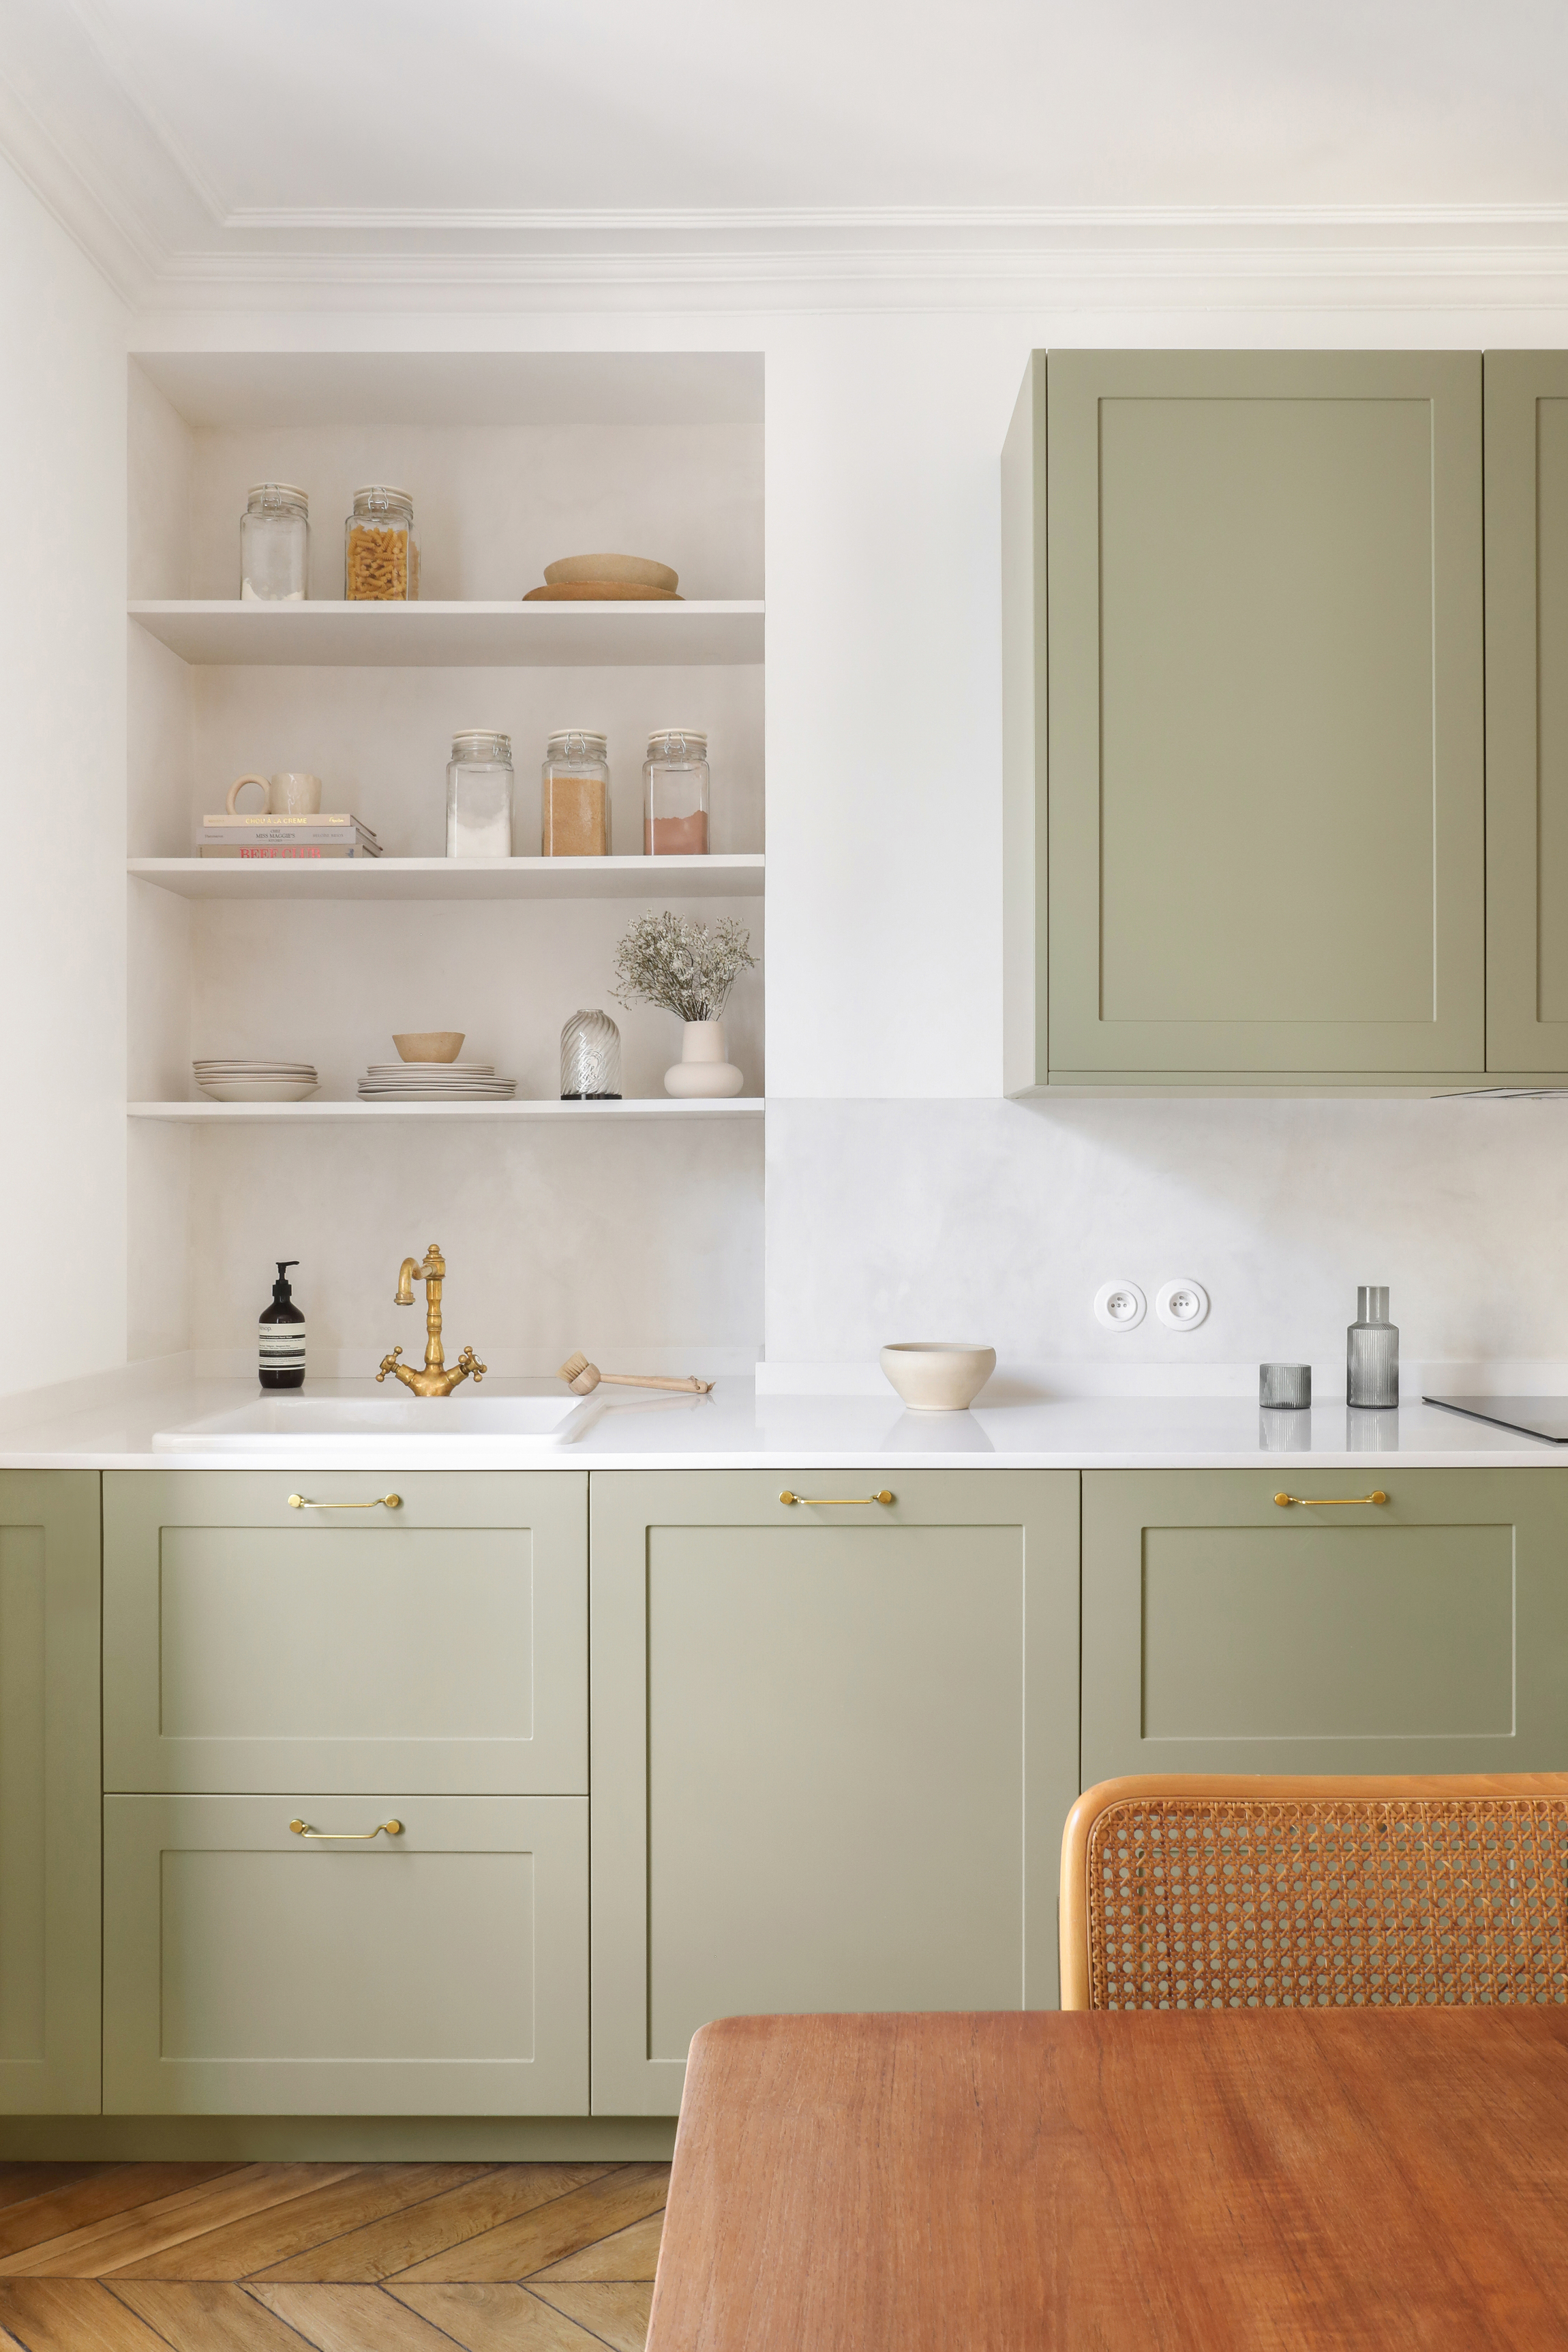 A kitchen with sage green cabinets